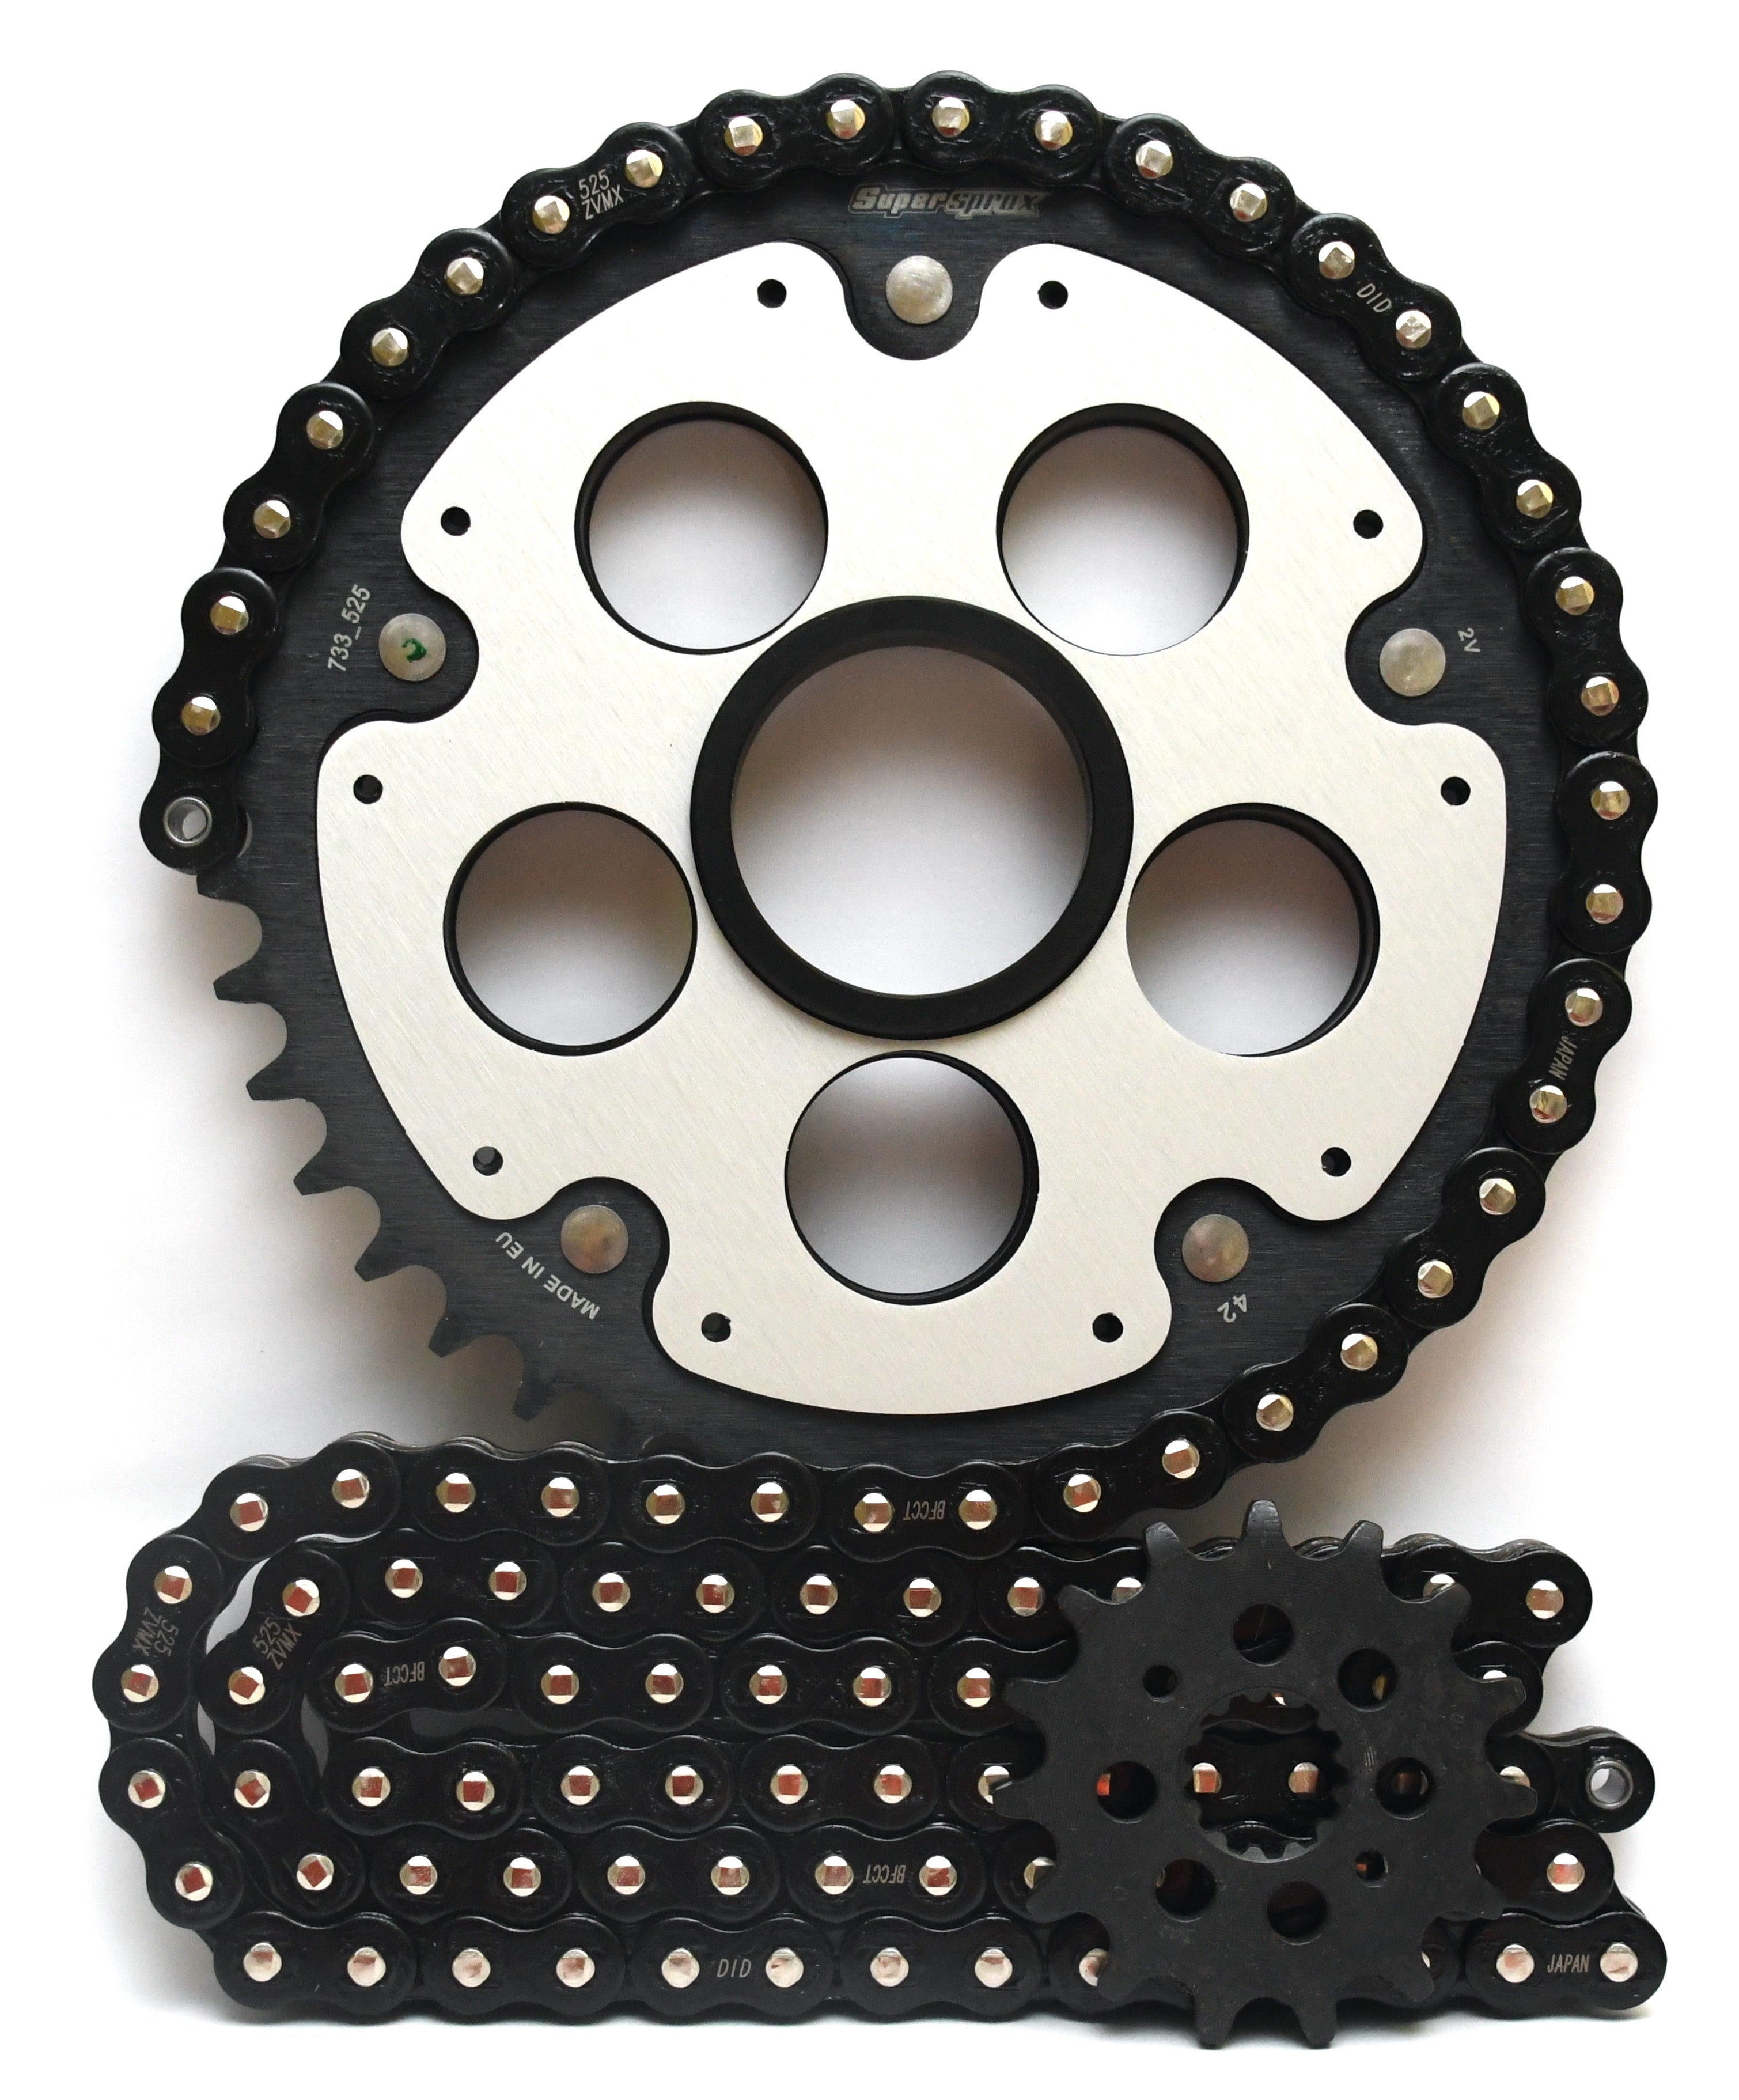 Supersprox Chain & Sprocket Kit for Ducati 1100 Monster (Inc Evo/S) 2009-2013- Standard Gearing